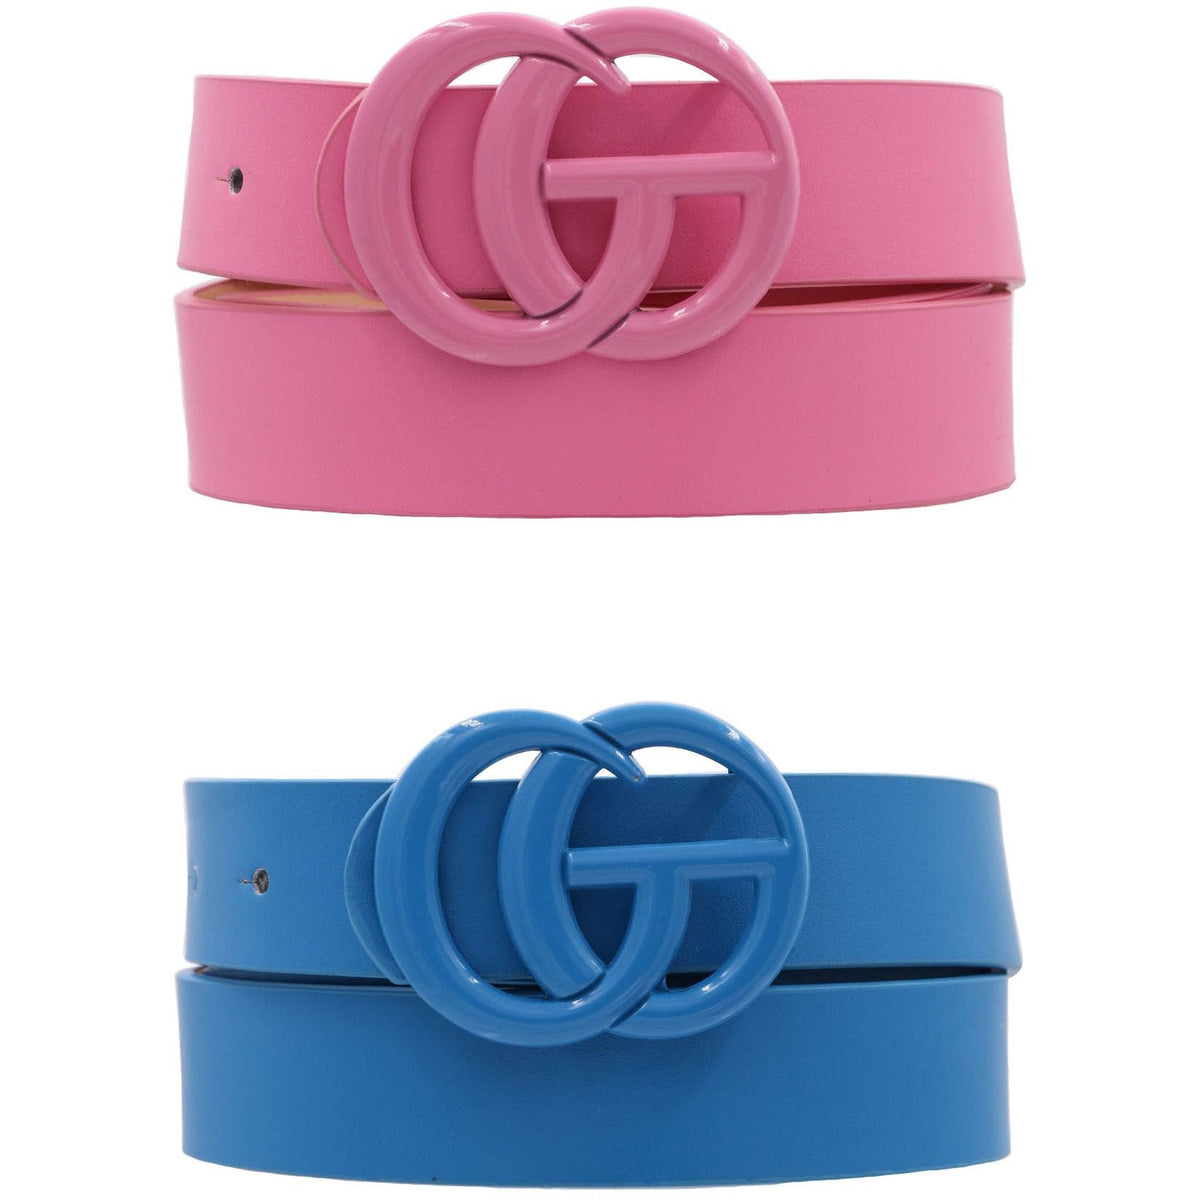 Boujee Belts ( lots of colors) Set of 2